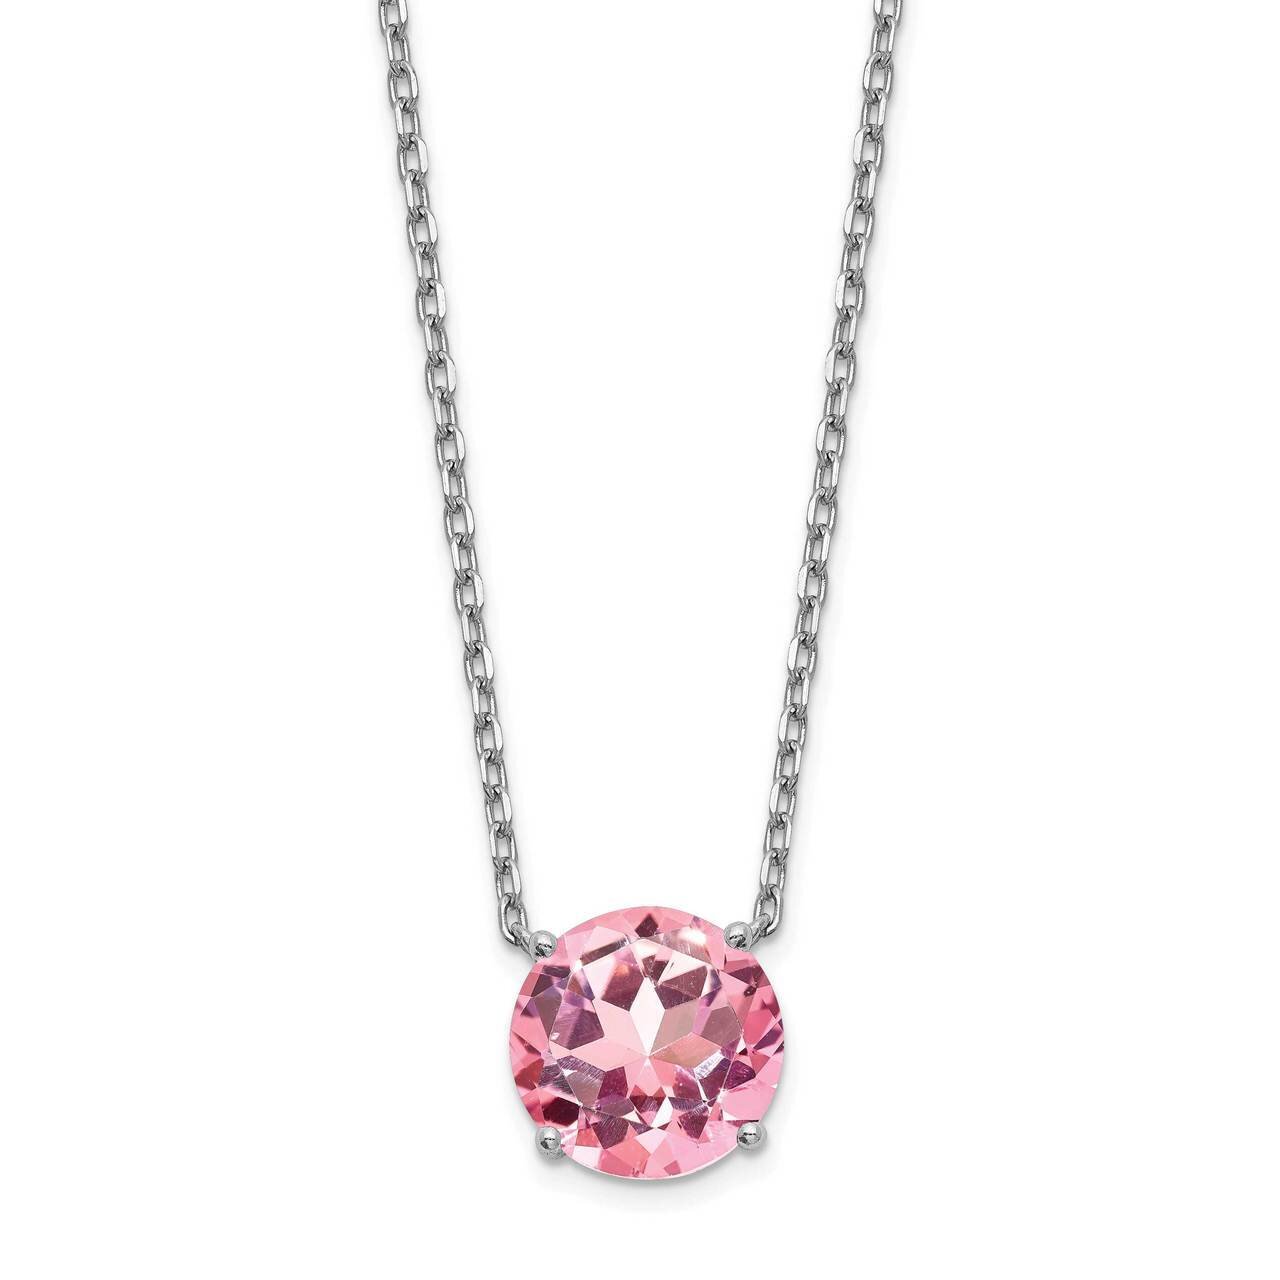 Light Pink Swarovski with 2 inch Extender Necklace Sterling Silver Rhodium-plated QG5529-16.5